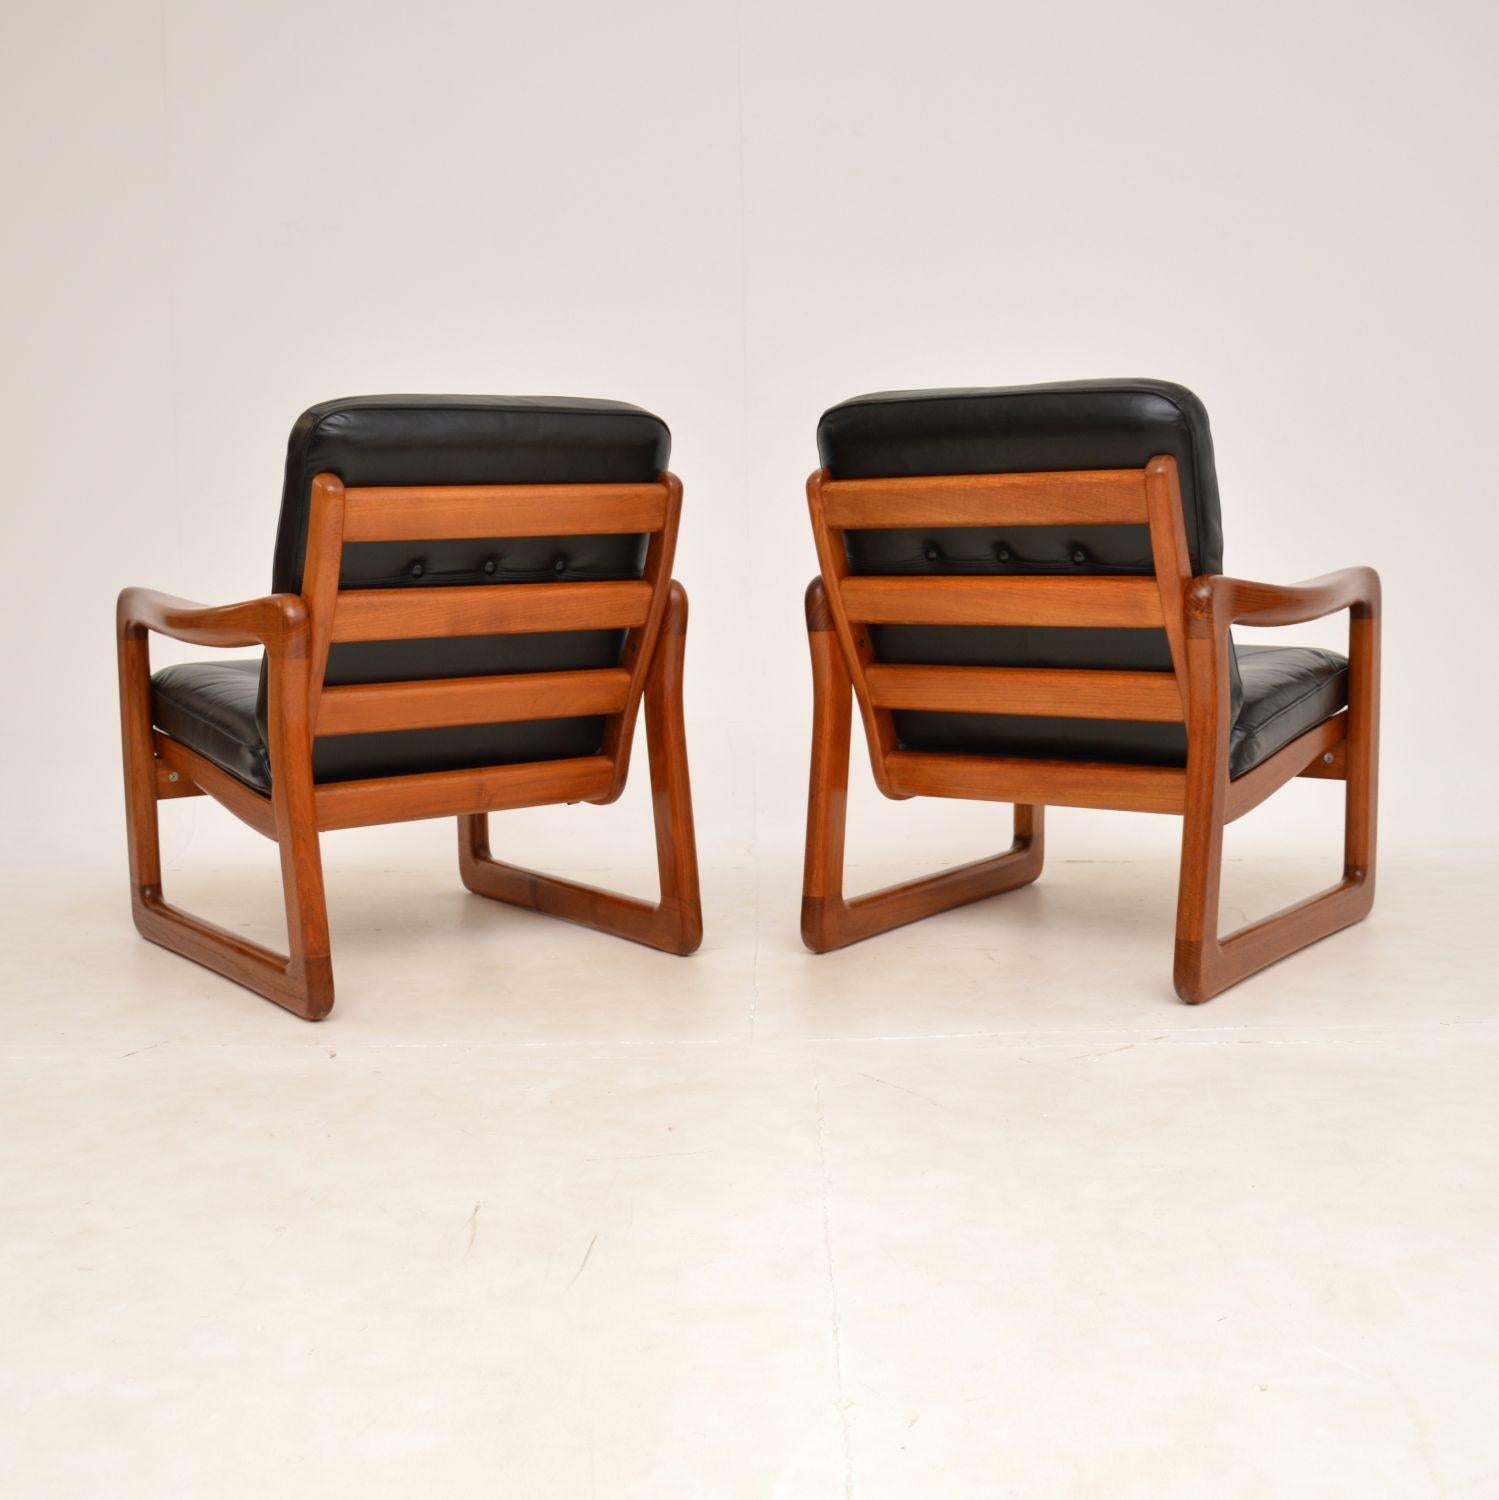 1970s Pair of Vintage Danish Teak & Leather Armchairs In Good Condition For Sale In London, GB